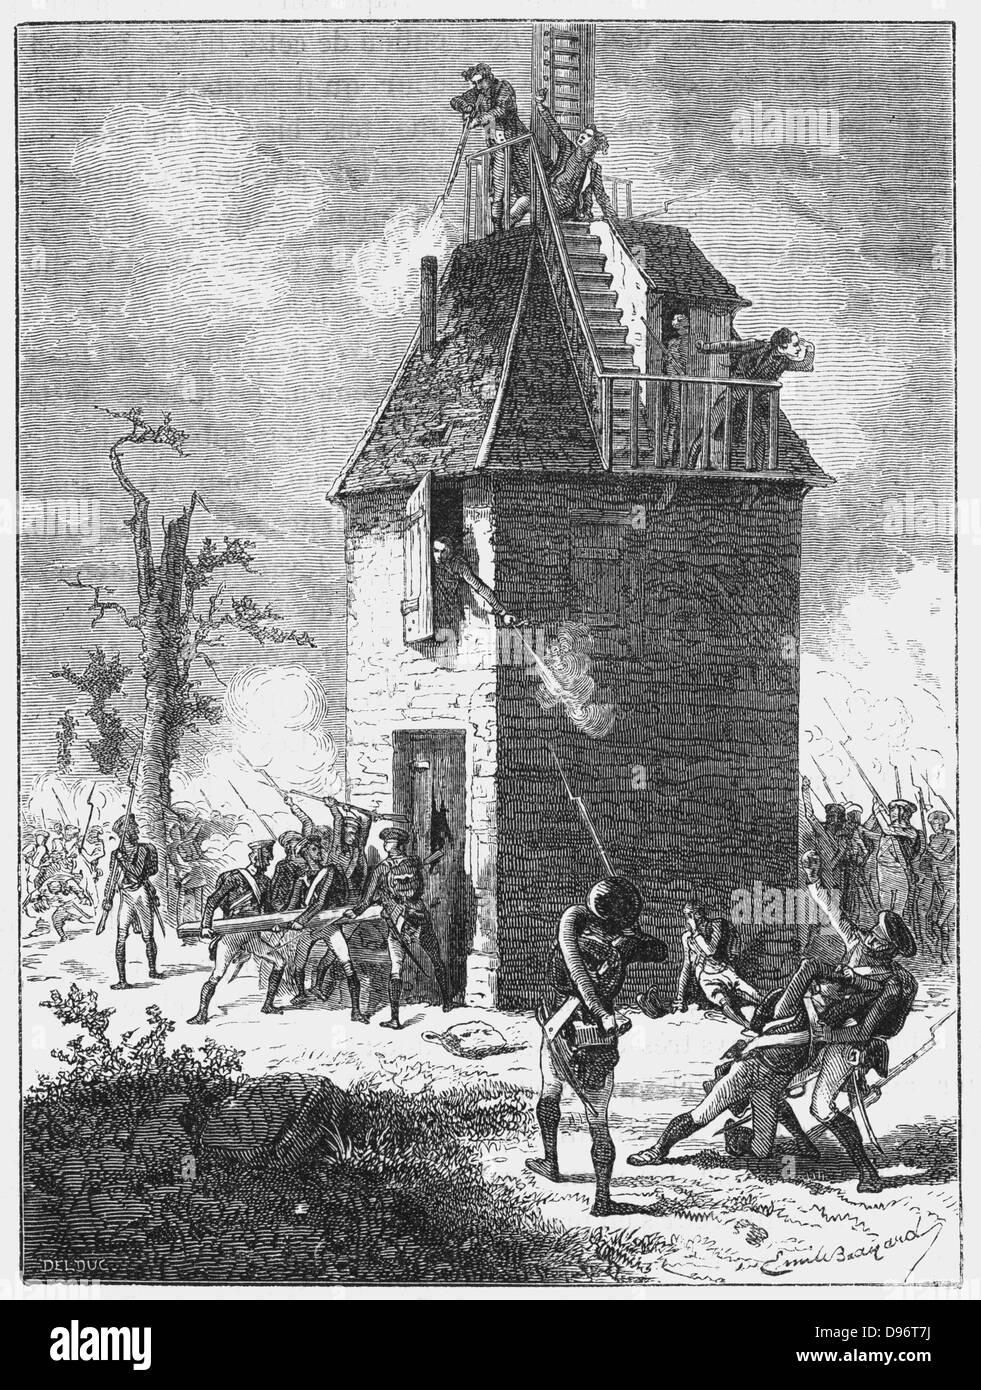 Napoleon's soldiers defending a telegraph post shortly before his defeat by Wellington. This would have been fitted with the Chappe optical/aerial telegraph (semaphore) system. From Louis Figuier 'Les Merveilles de la Science', Paris, c1870. Engraving. Stock Photo